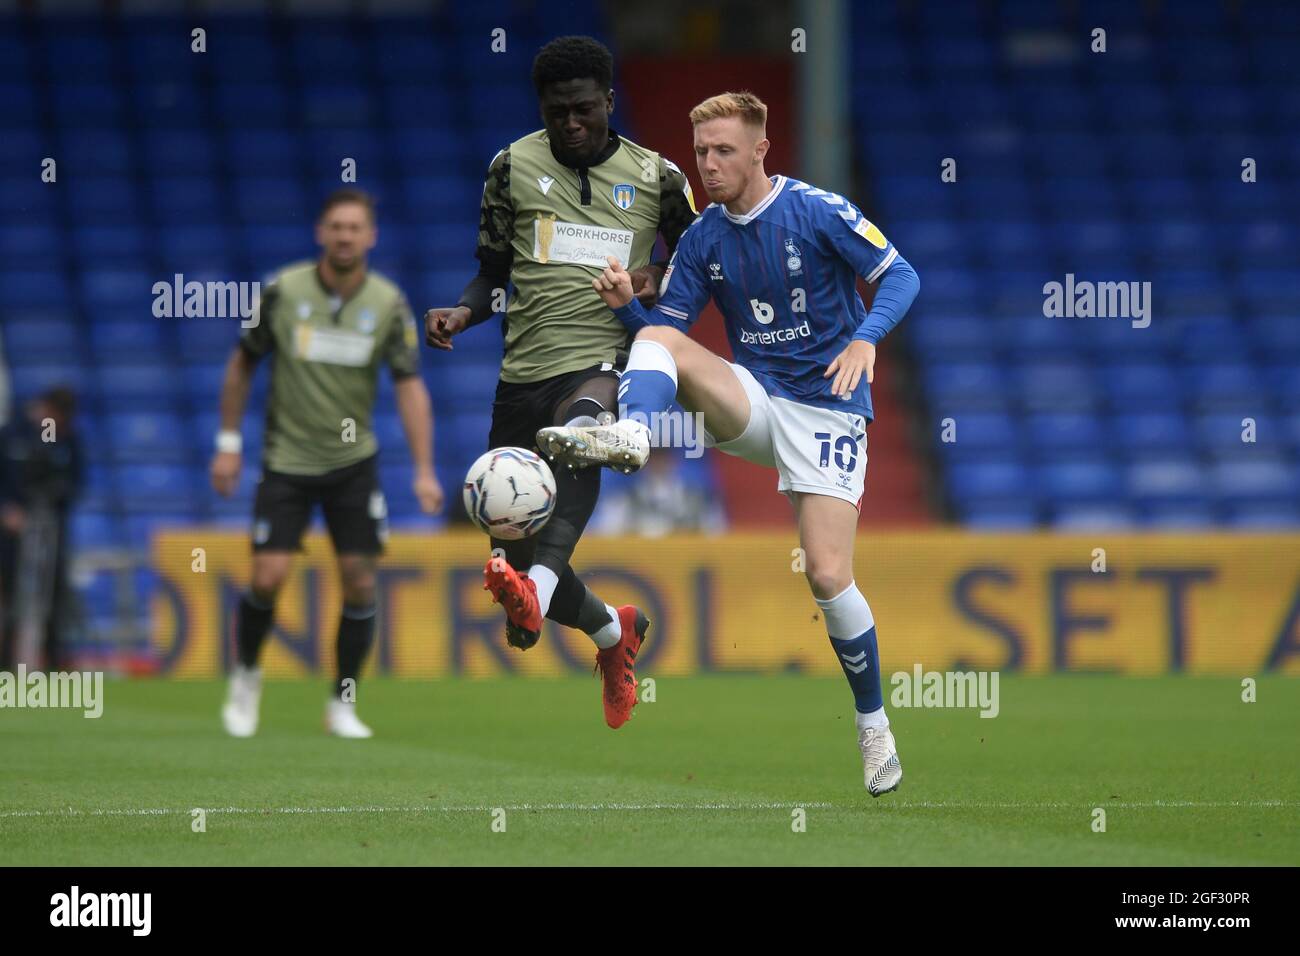 Brendan Wiredu of Colchester United does battle with Davis Keillor-Dunn of Oldham Athletic - Oldham Athletic v Colchester United, Sky Bet League Two, Boundary Park, Oldham, UK - 21st August 2021  Editorial Use Only - DataCo restrictions apply Stock Photo